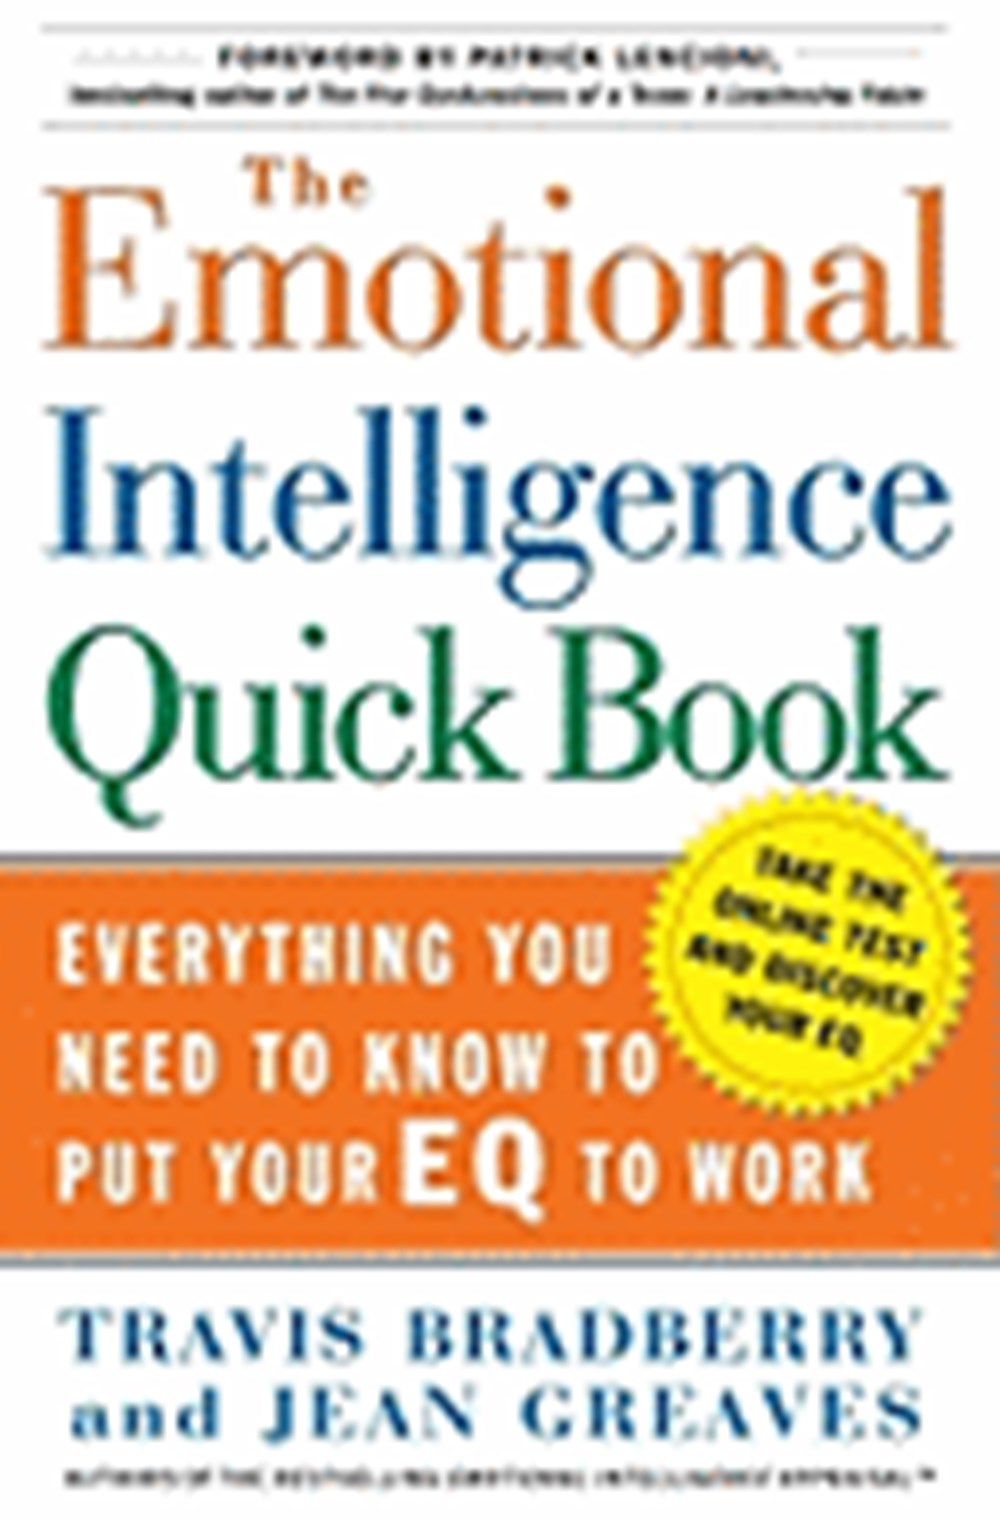 Emotional Intelligence Quick Book: Everything You Need to Know to Put Your Eq to Work